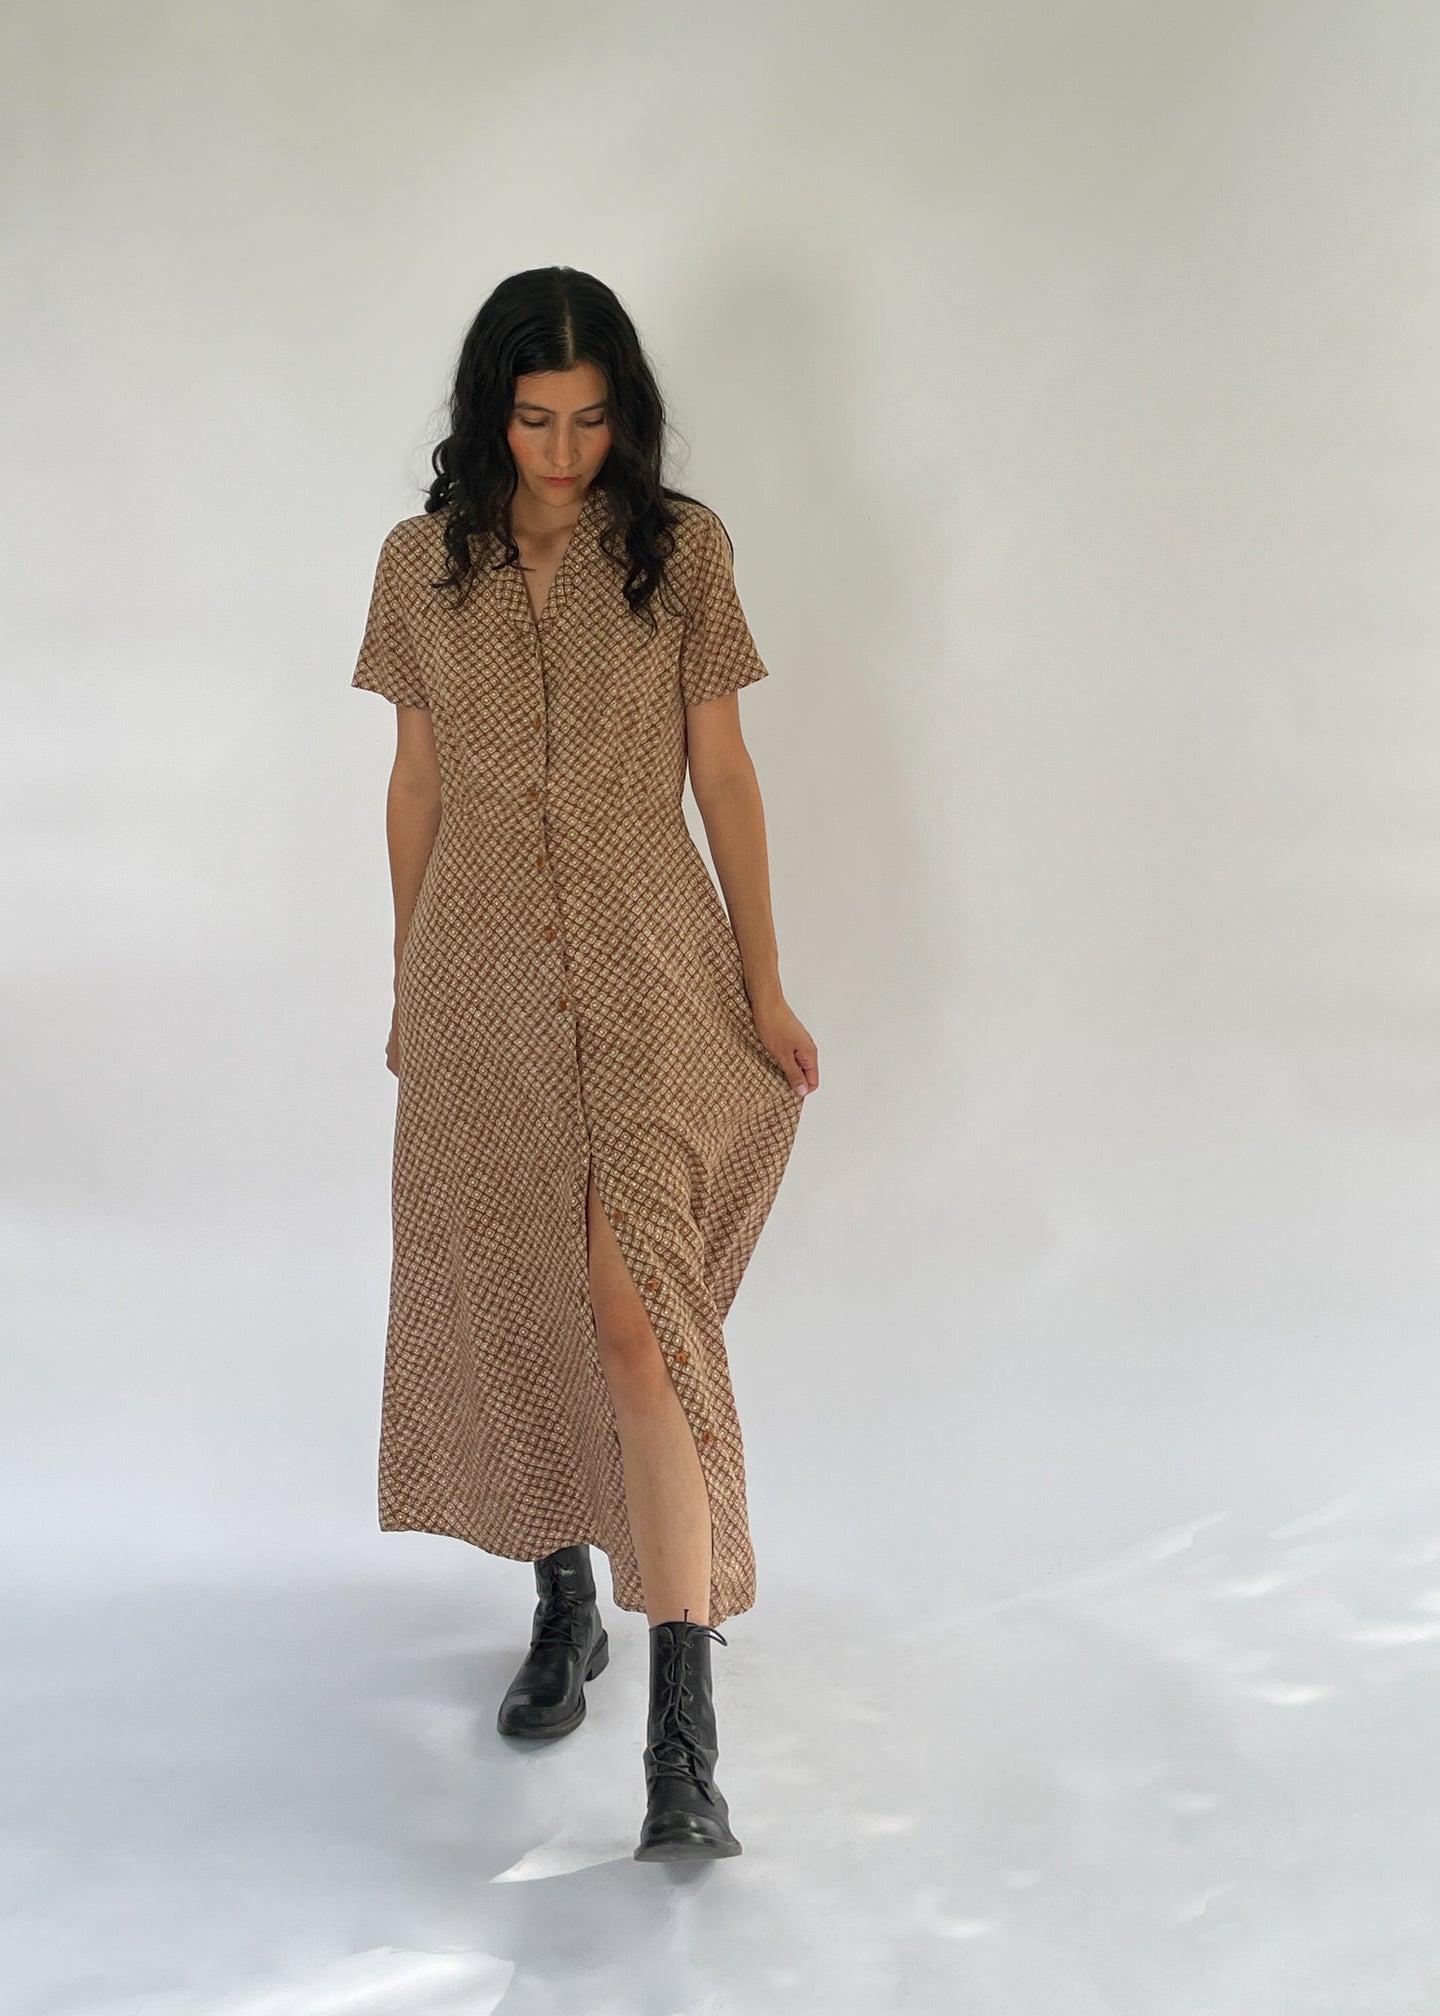 Vintage Collared Button Down Dress | XS - M